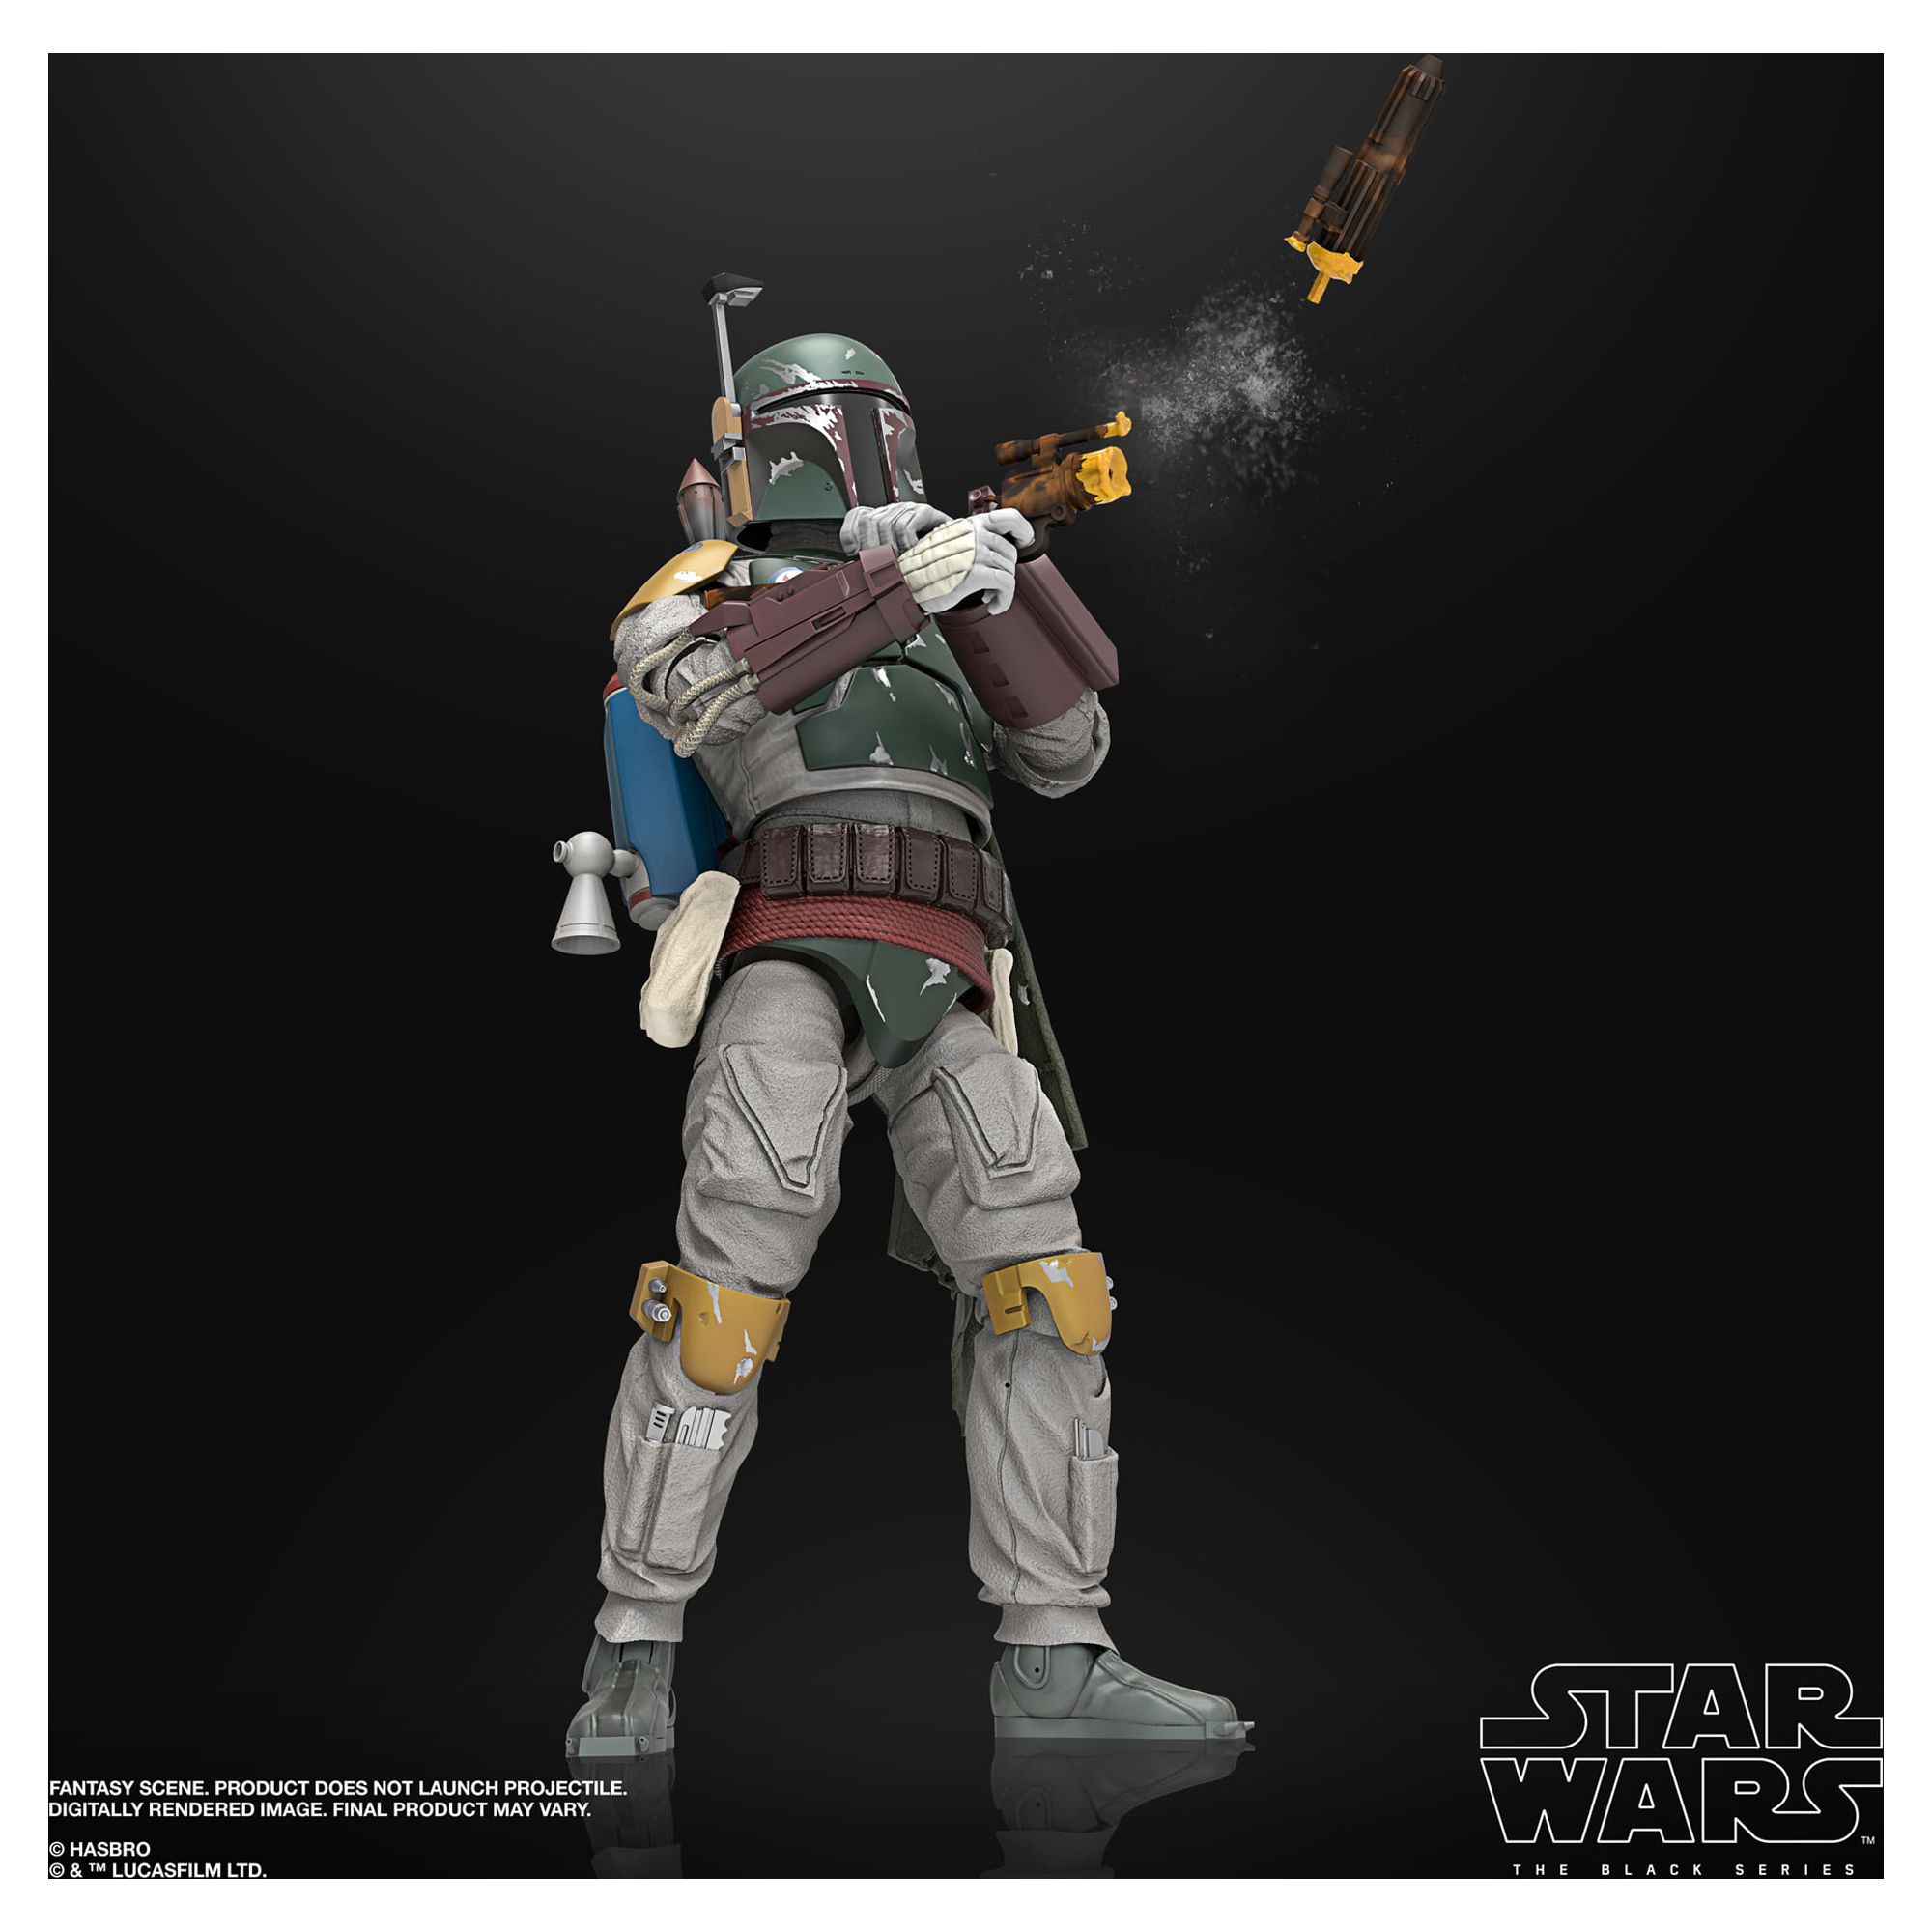 Star Wars Return of the Jedi: The Black Series Boba Fett Kids Toy Action Figure for Boys and Girls (3”) - image 5 of 11